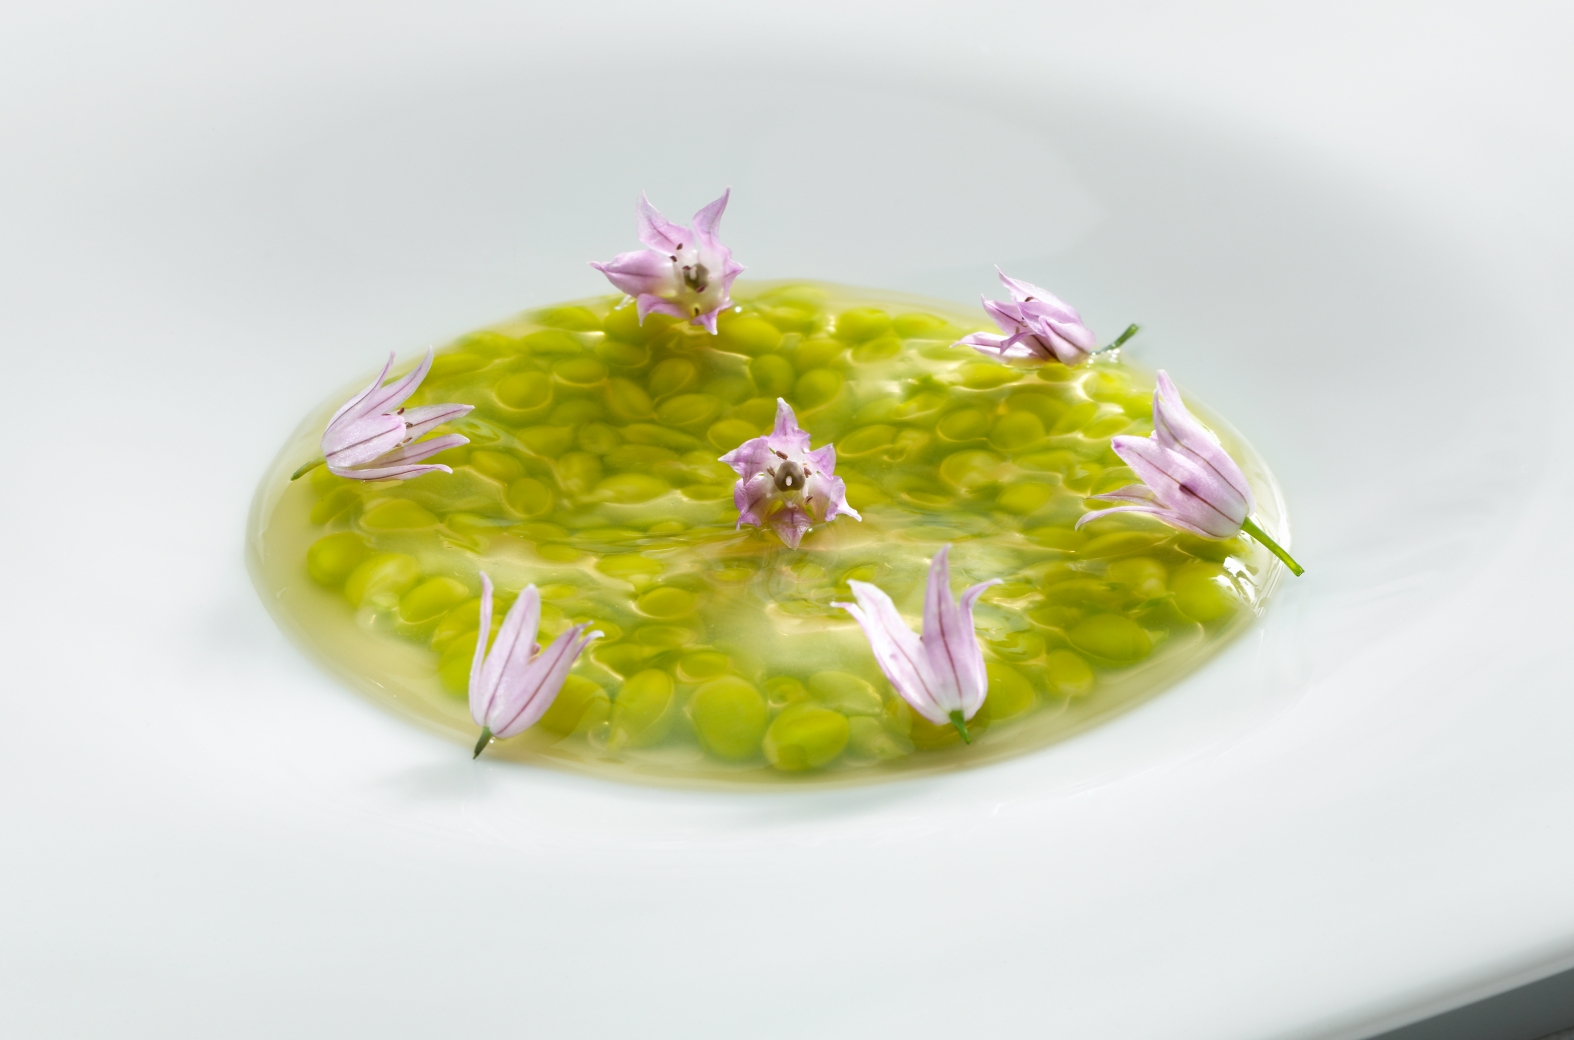 Tear sweet peas covered in a light, tepid veil of ginger consomme. Chive flowers.
PHOTO: José Luis López de Zubiría / Mugaritz